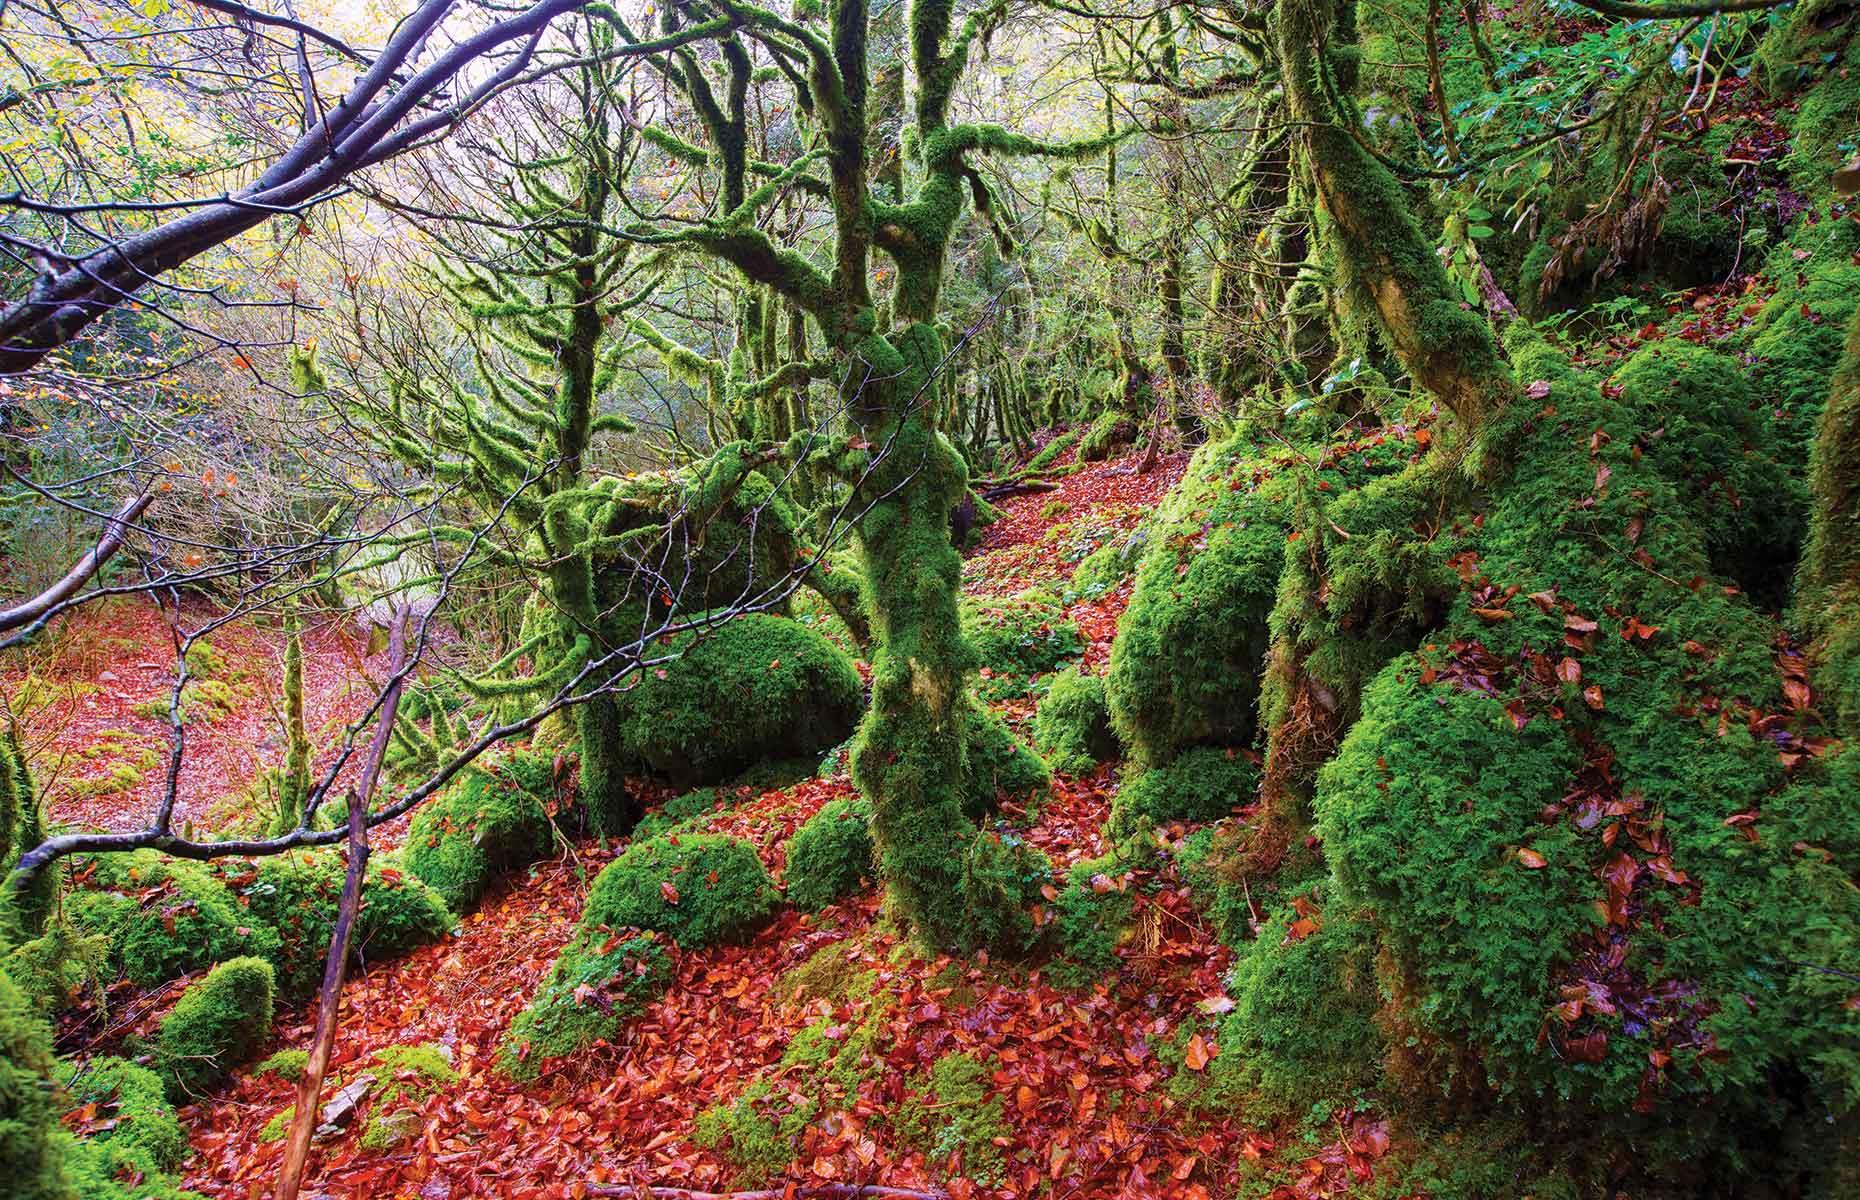 <p>Covering 42,800 acres, Irati is a large beech and fir forest in the western Pyrenees. Relatively isolated, Irati’s environments range from forests to wetlands, and from subalpine meadows to Atlantic heaths. </p>